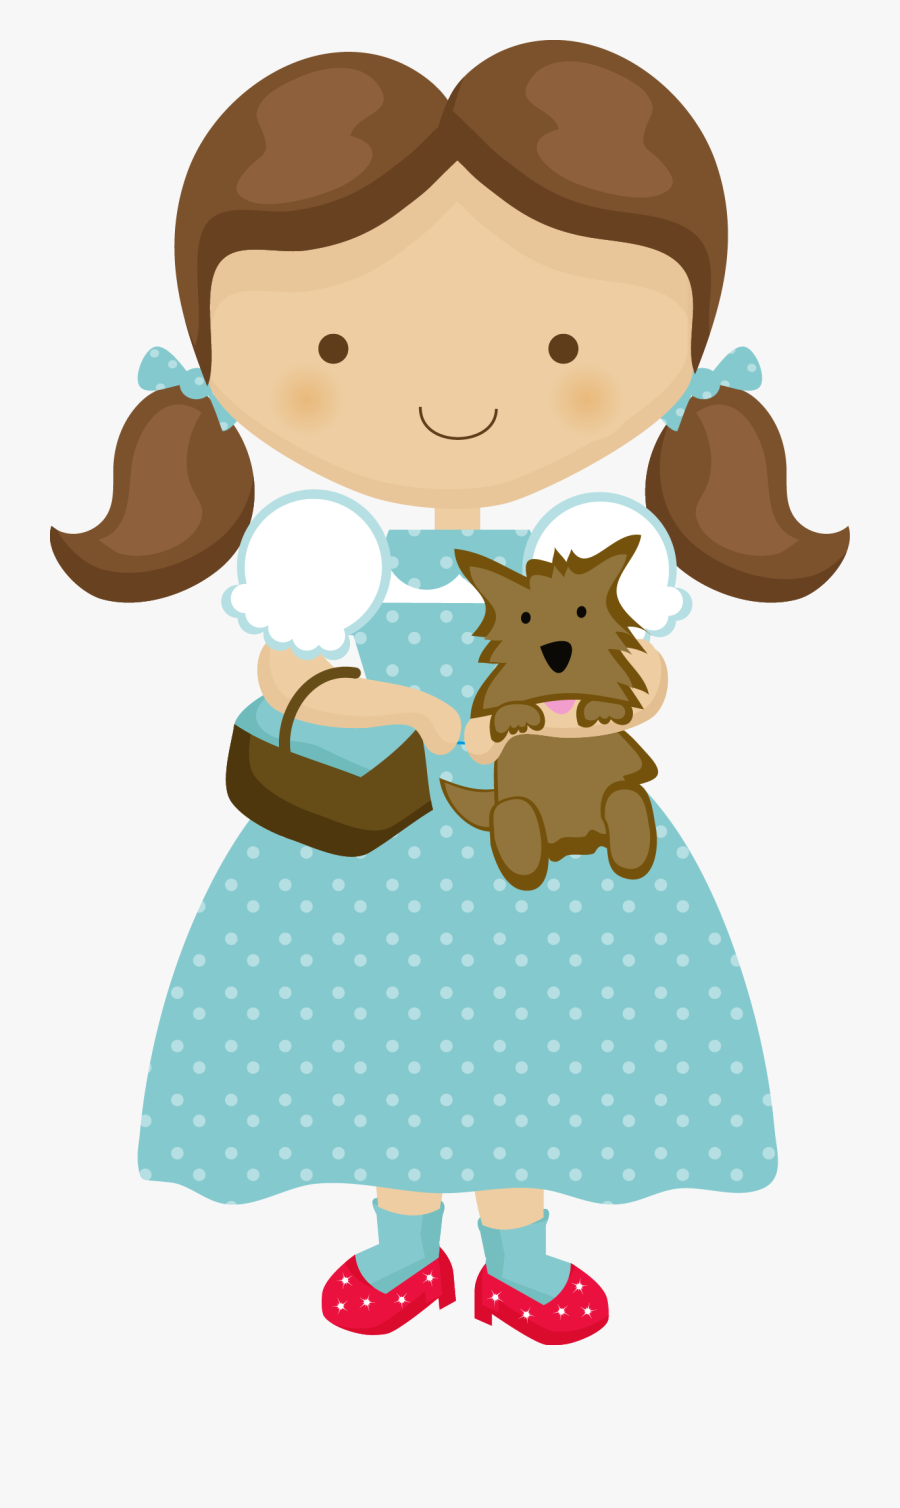 Clipart Dorothy Of Wizard Of Oz - Wizard Of Oz Dorothy Cartoon, Transparent Clipart